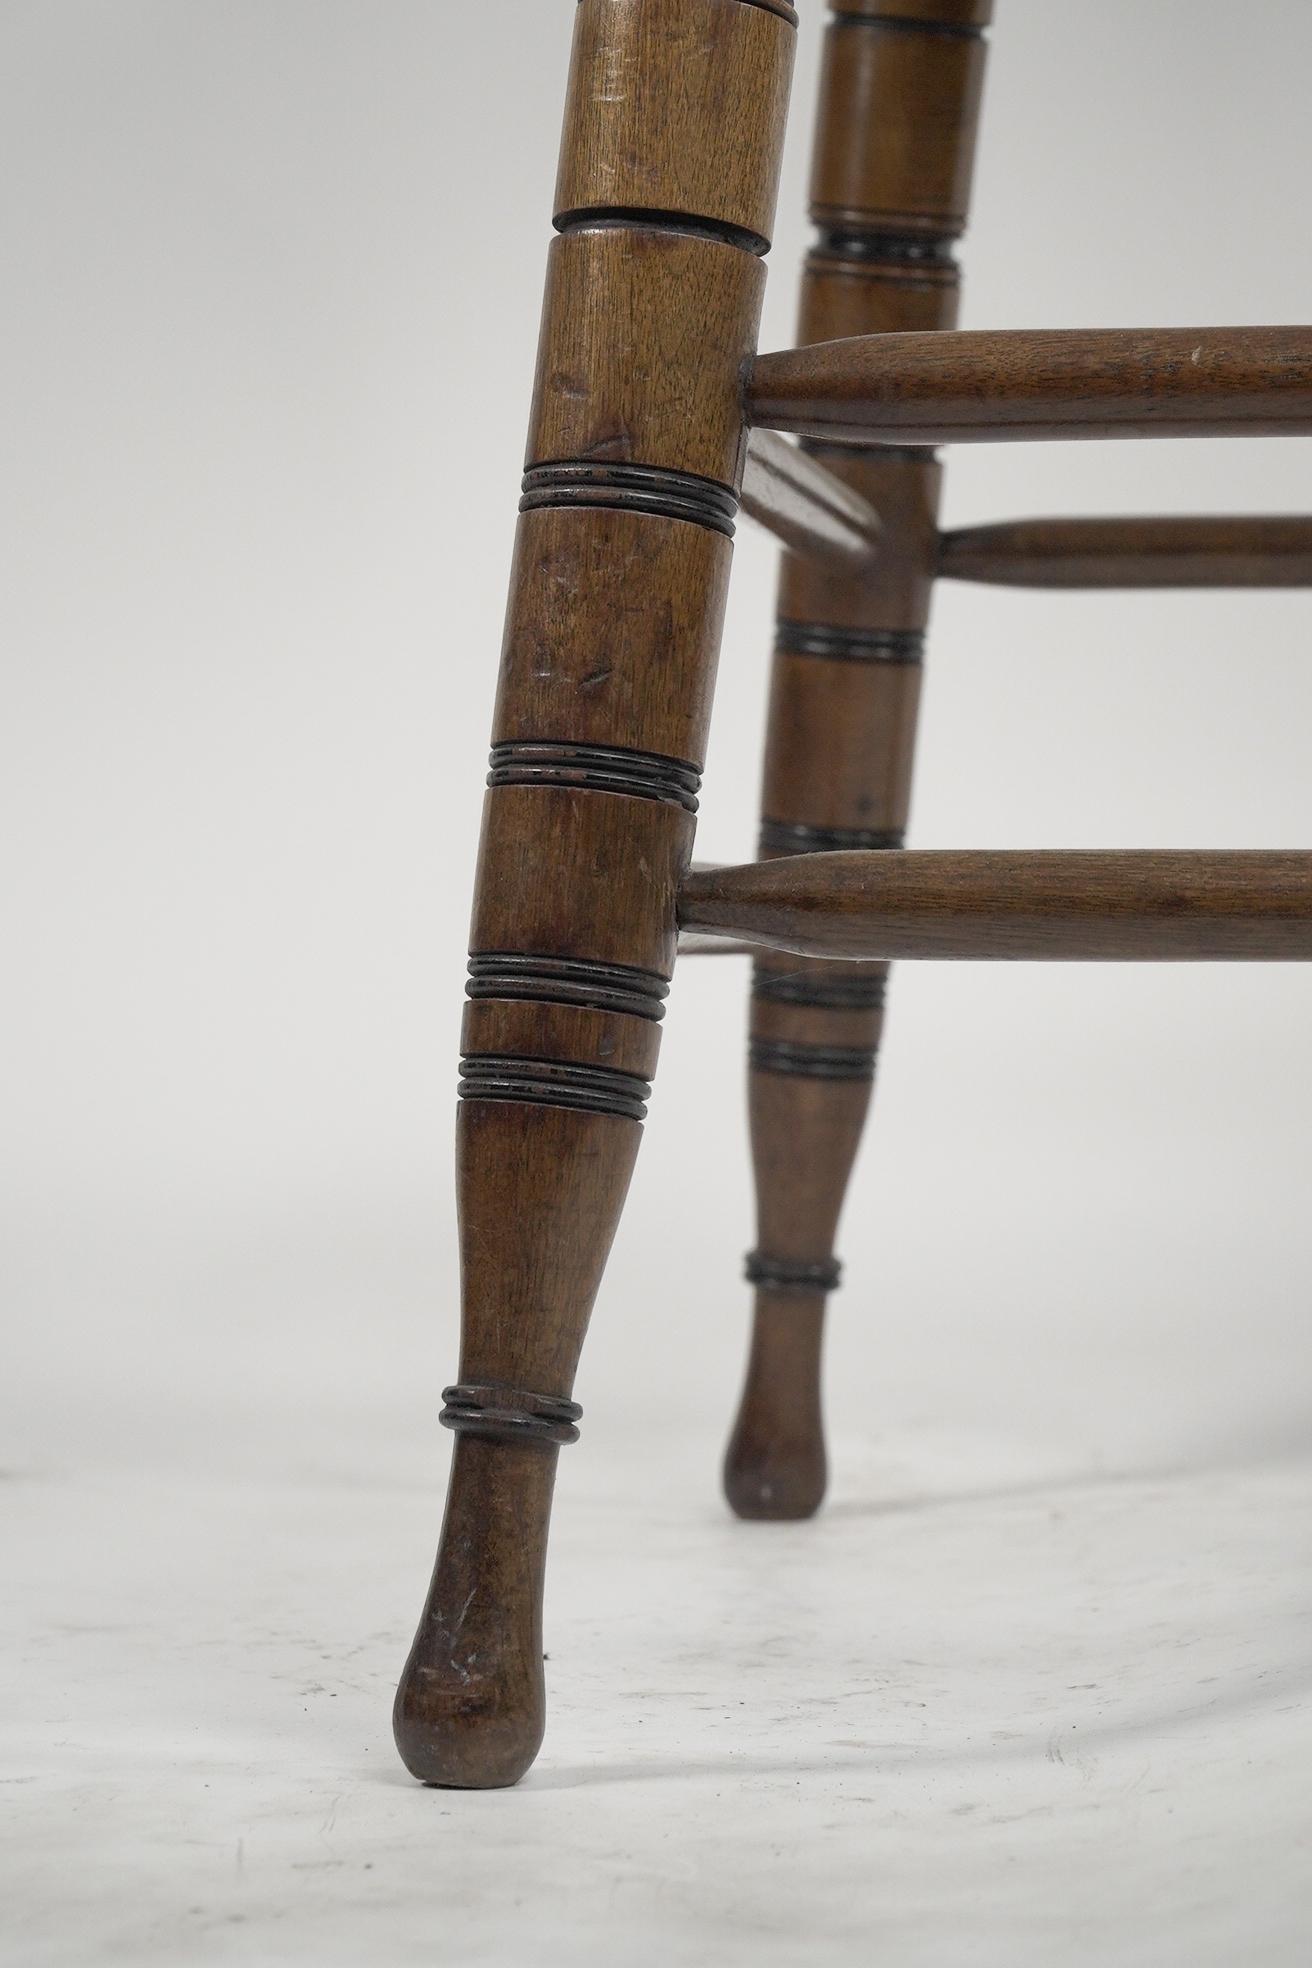 Aesthetic Movement Walnut centre table with incised circular details to the legs For Sale 2